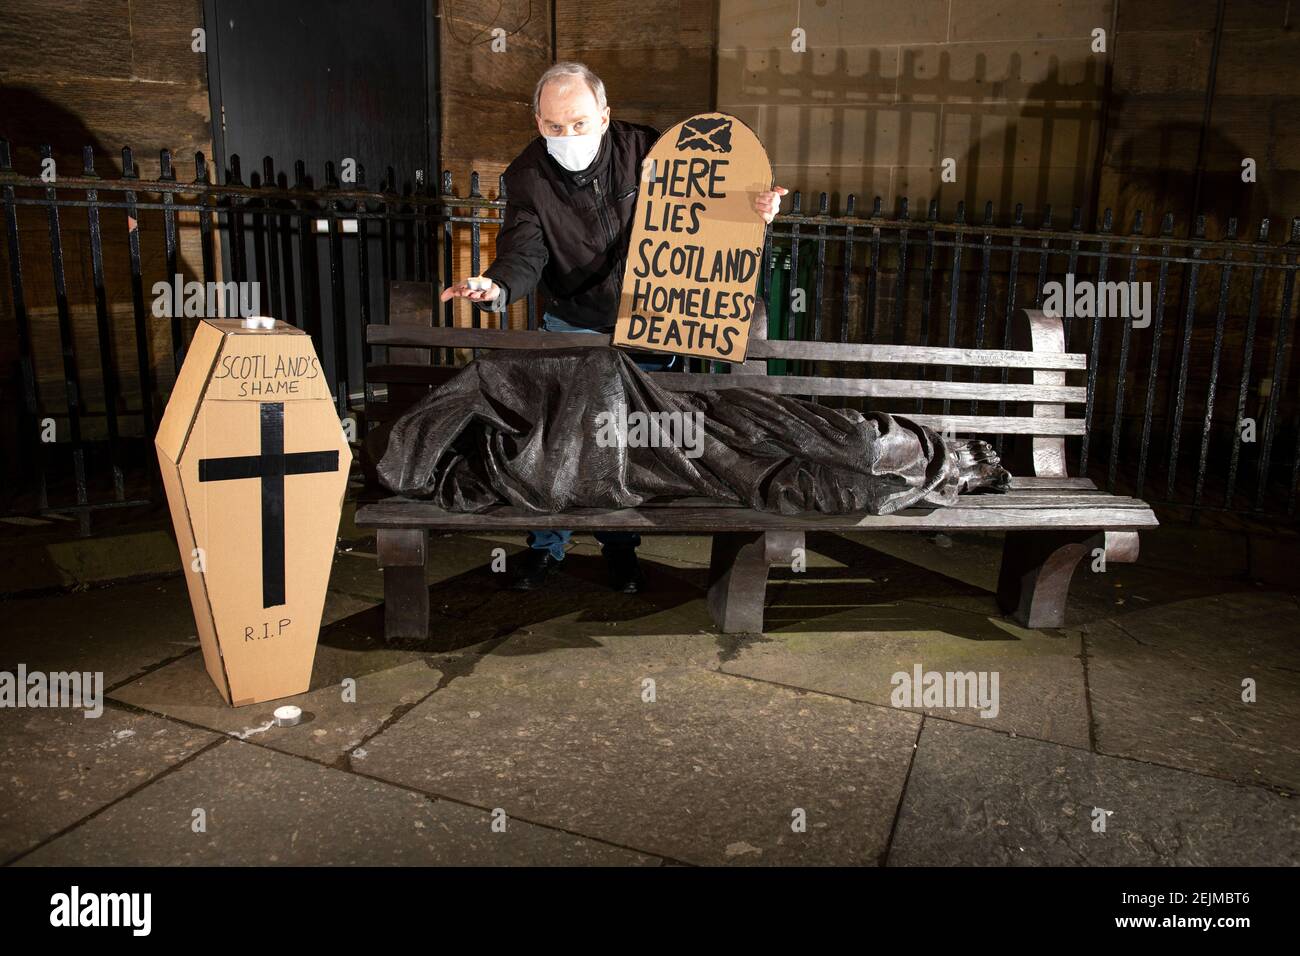 Glasgow, Scotland, UK. 22nd Feb, 2021. Pictured: Sean Clerkin - Scottish Tenants Organisation, holding a gravestone shaped placard which reads, “HERE LIES SCOTLANDS HOMELESS DEATHS”. Today 23rd Feb 21, the Scottish Government has released the homeless deaths figures 3 days early which are up by an increase of 11% from last year. The link https://www.nrscotland.gov.uk/news/2021/homeless-deaths-2019 shows the article today. Credit: Colin Fisher/Alamy Live News Stock Photo